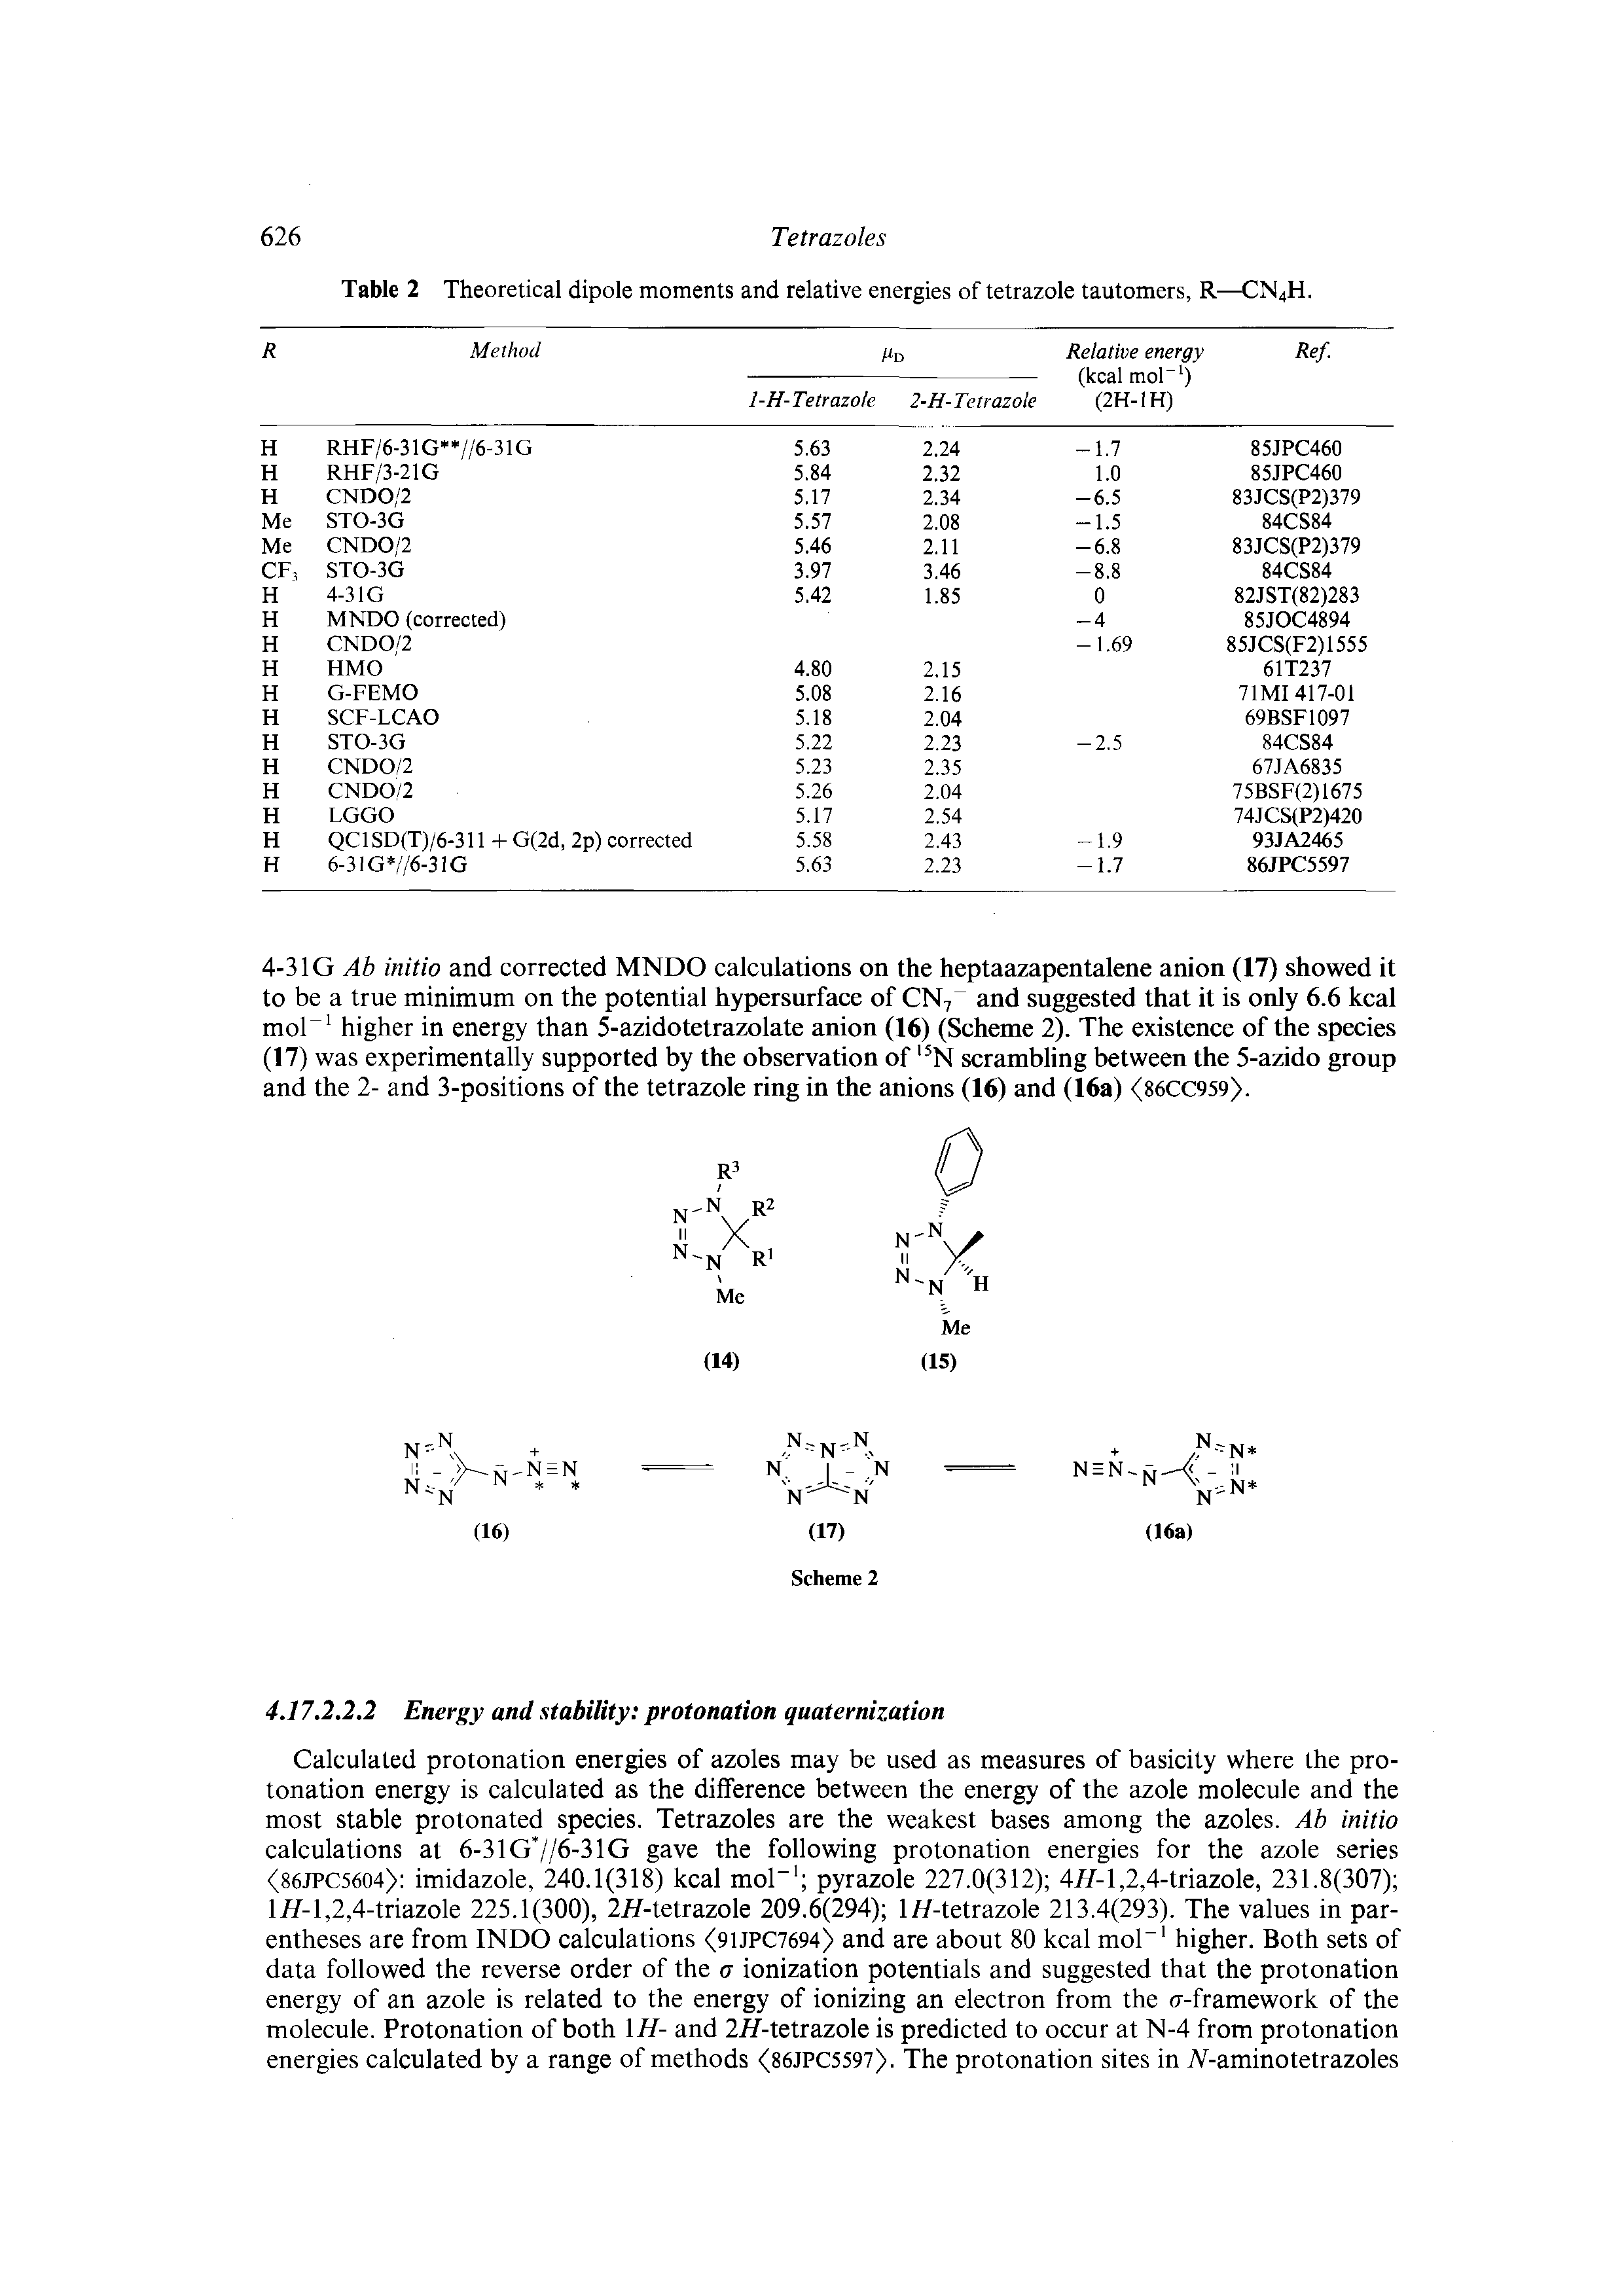 Table 2 Theoretical dipole moments and relative energies of tetrazole tautomers, R—CN4H.